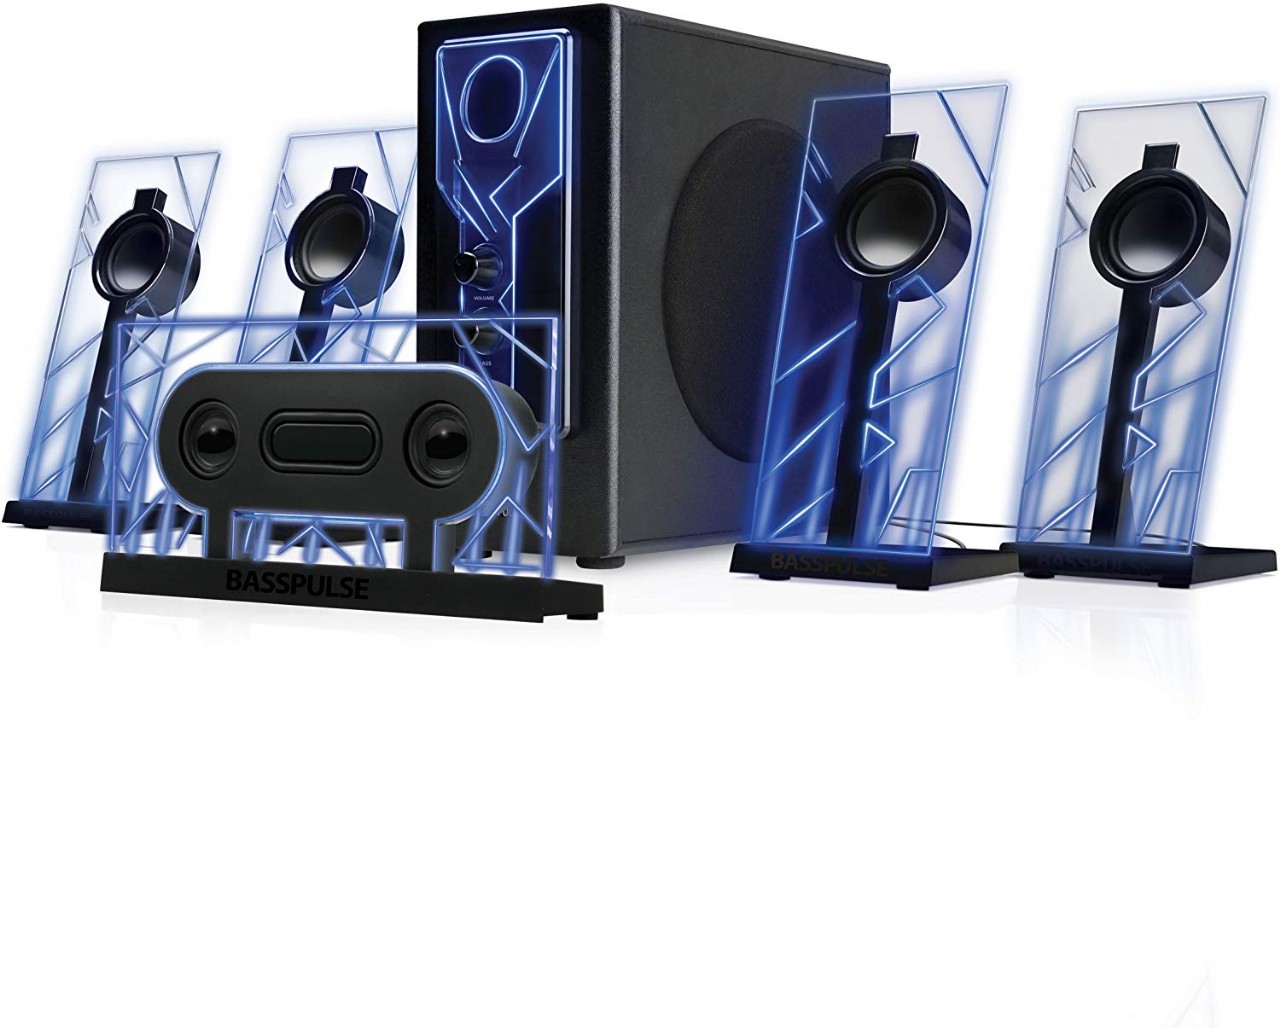 GOgroove BassPULSE 5.1 Computer Speakers Surround Sound with Subwoofer, 80 Watts and Blue LED Glow